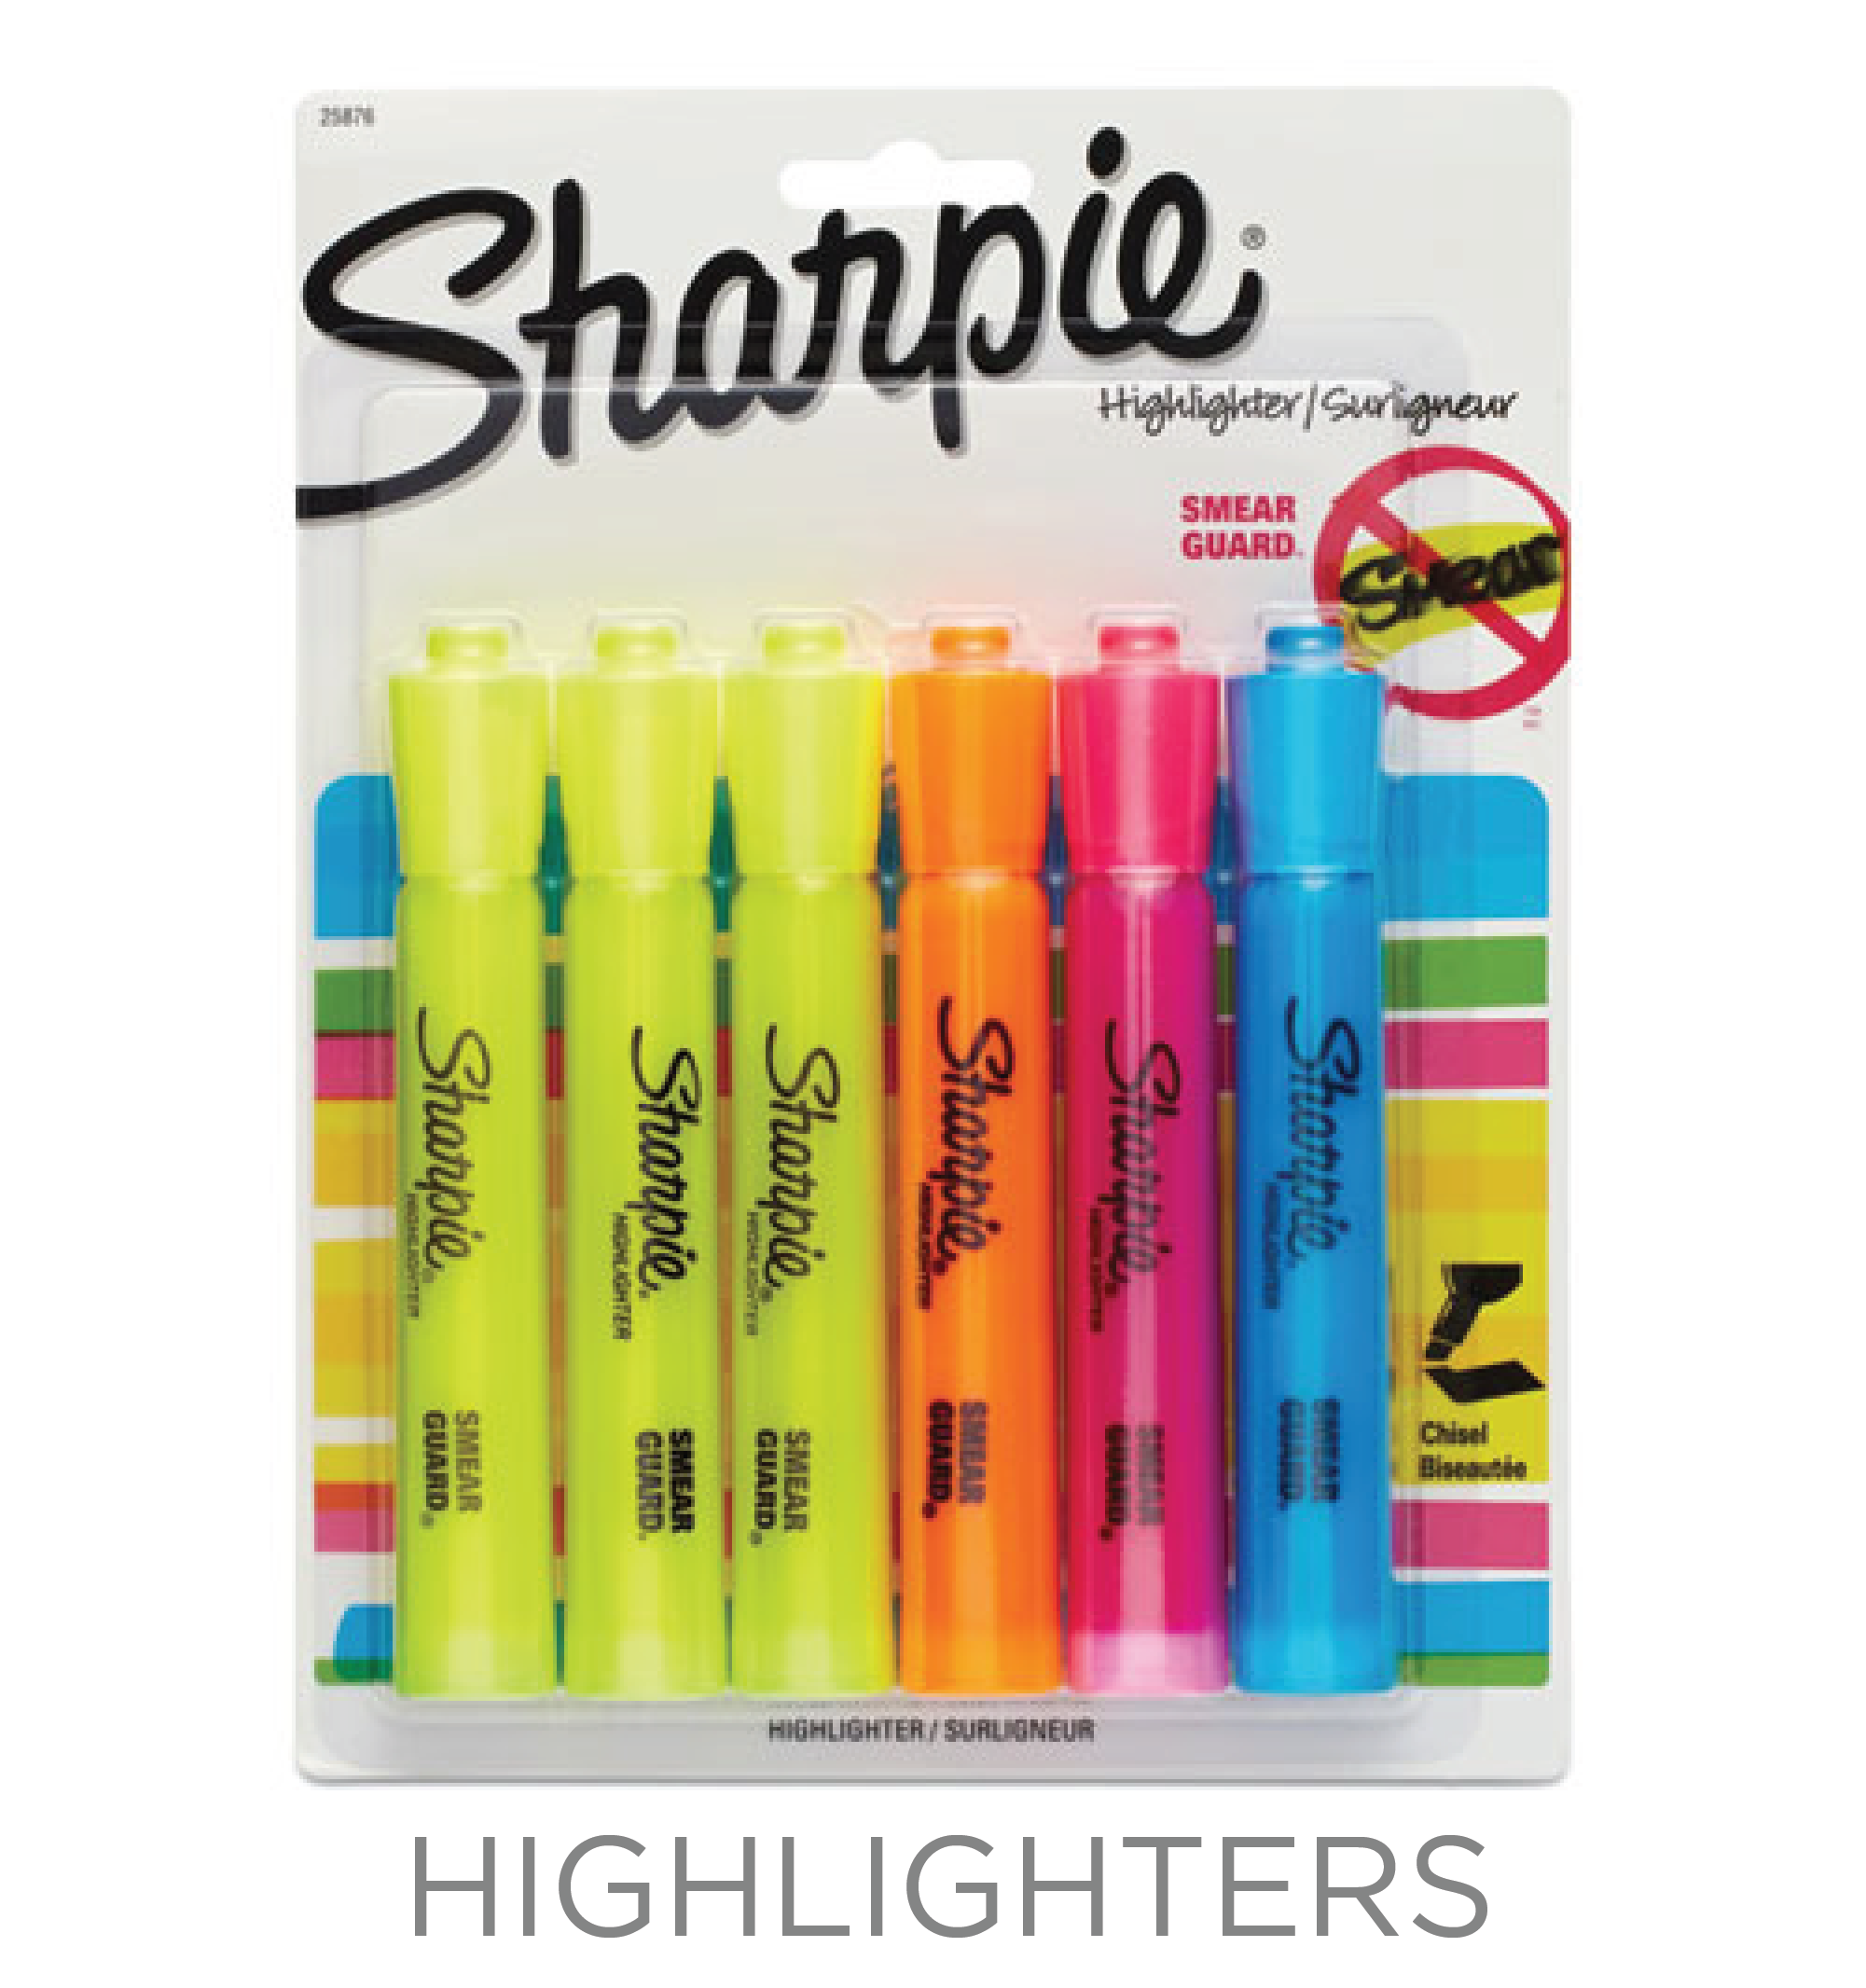 Highlighter - Preparing for the Holidays